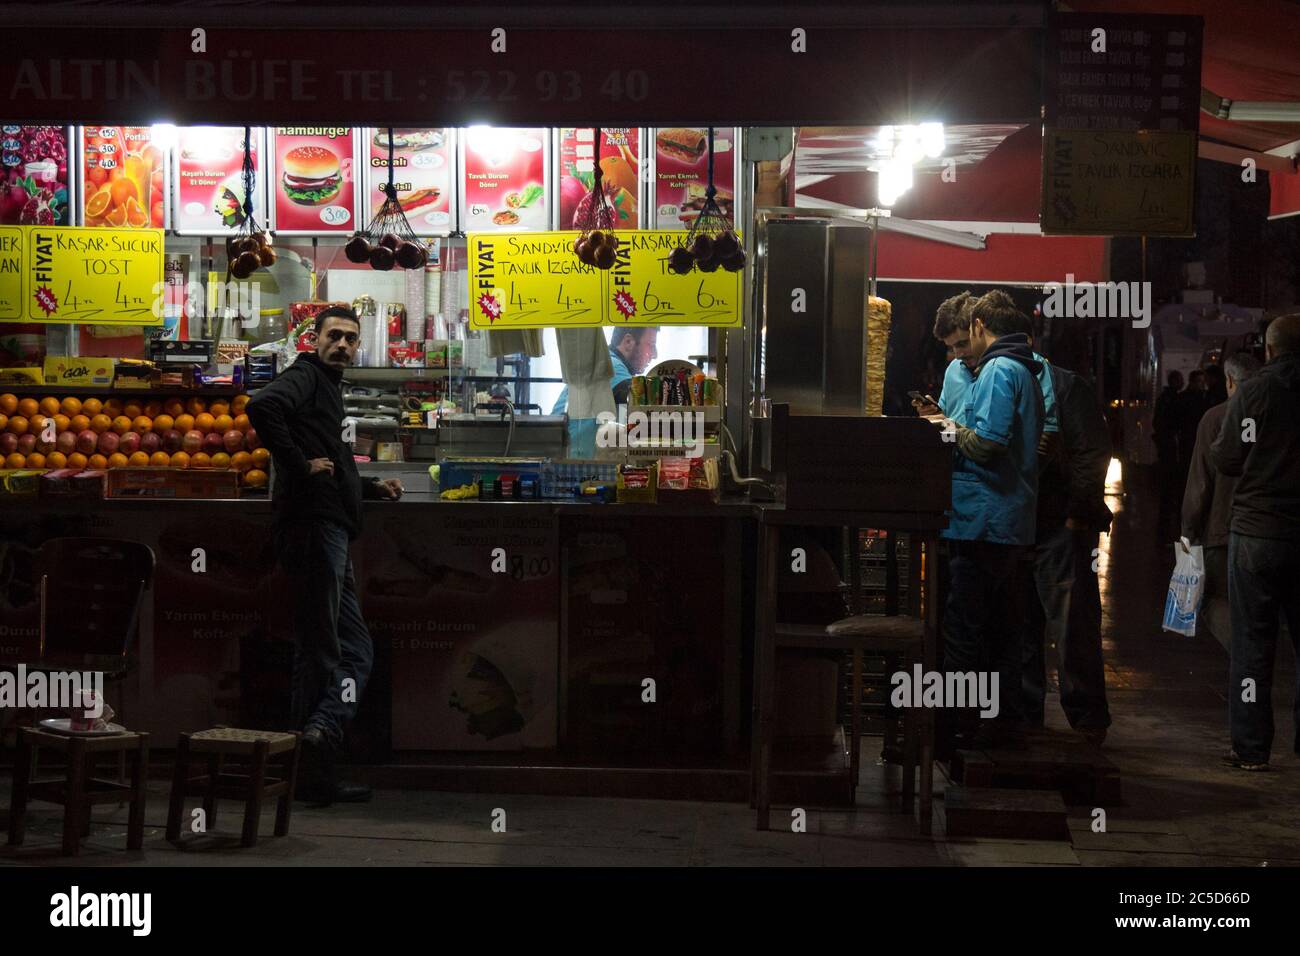 ISTANBUL, TURKEY - DECEMBER 29, 2015: People standing and eating turkish food in front of a Bufe, a typical street food stand of the streets of Istanb Stock Photo